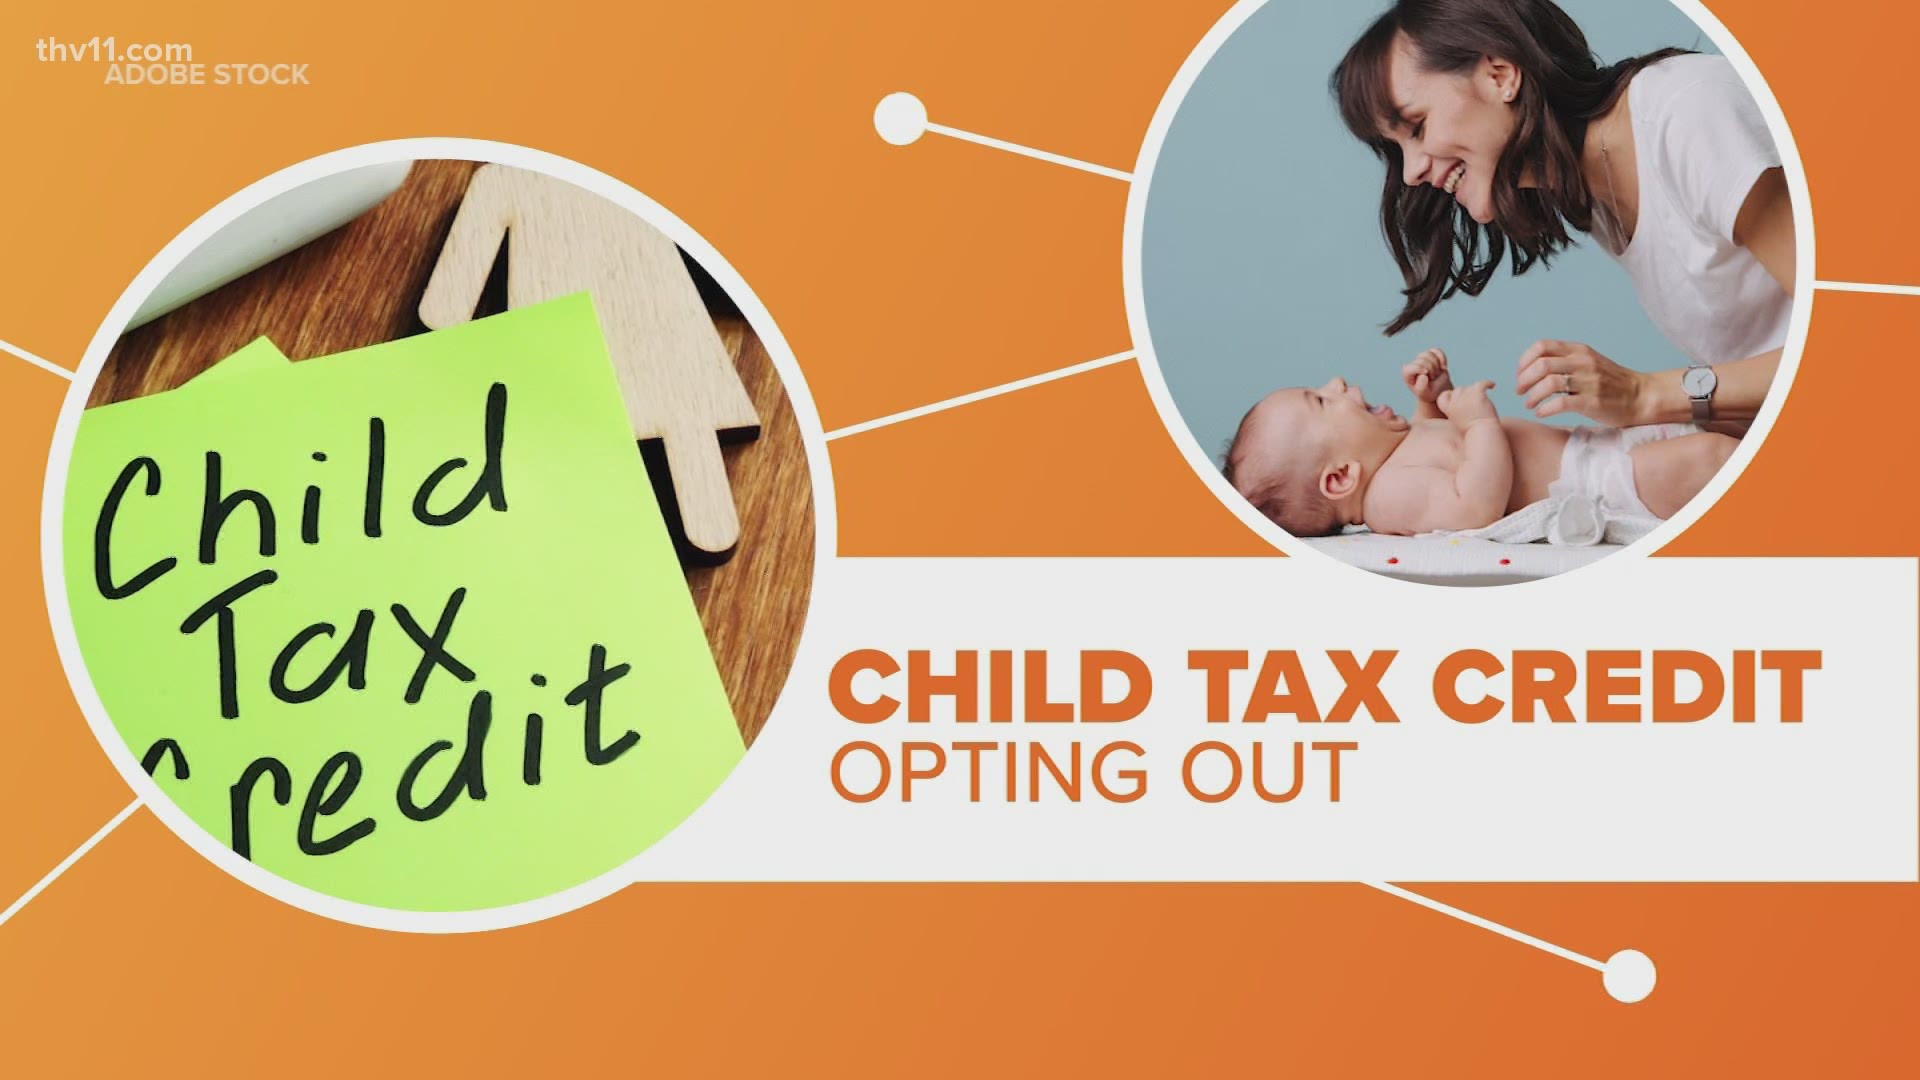 The child tax credit was part of the COVID relief package, and thousands of Arkansas families are about to get a check.